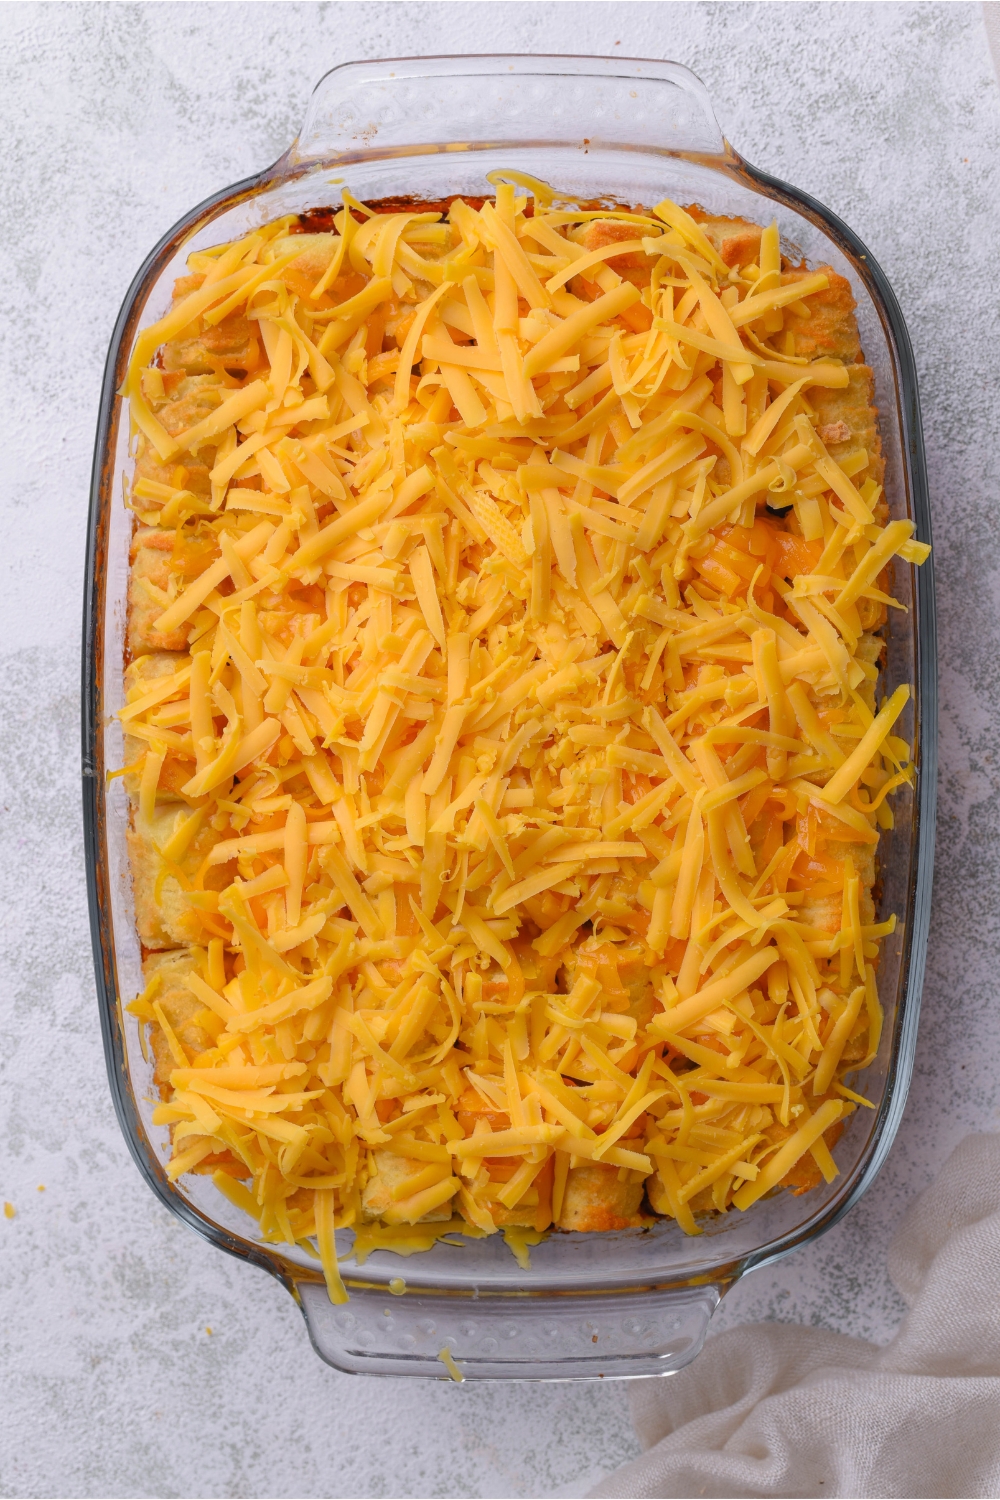 Shredded cheddar cheese on top of a Mexican tater tot casserole in a baking dish on a grey counter.